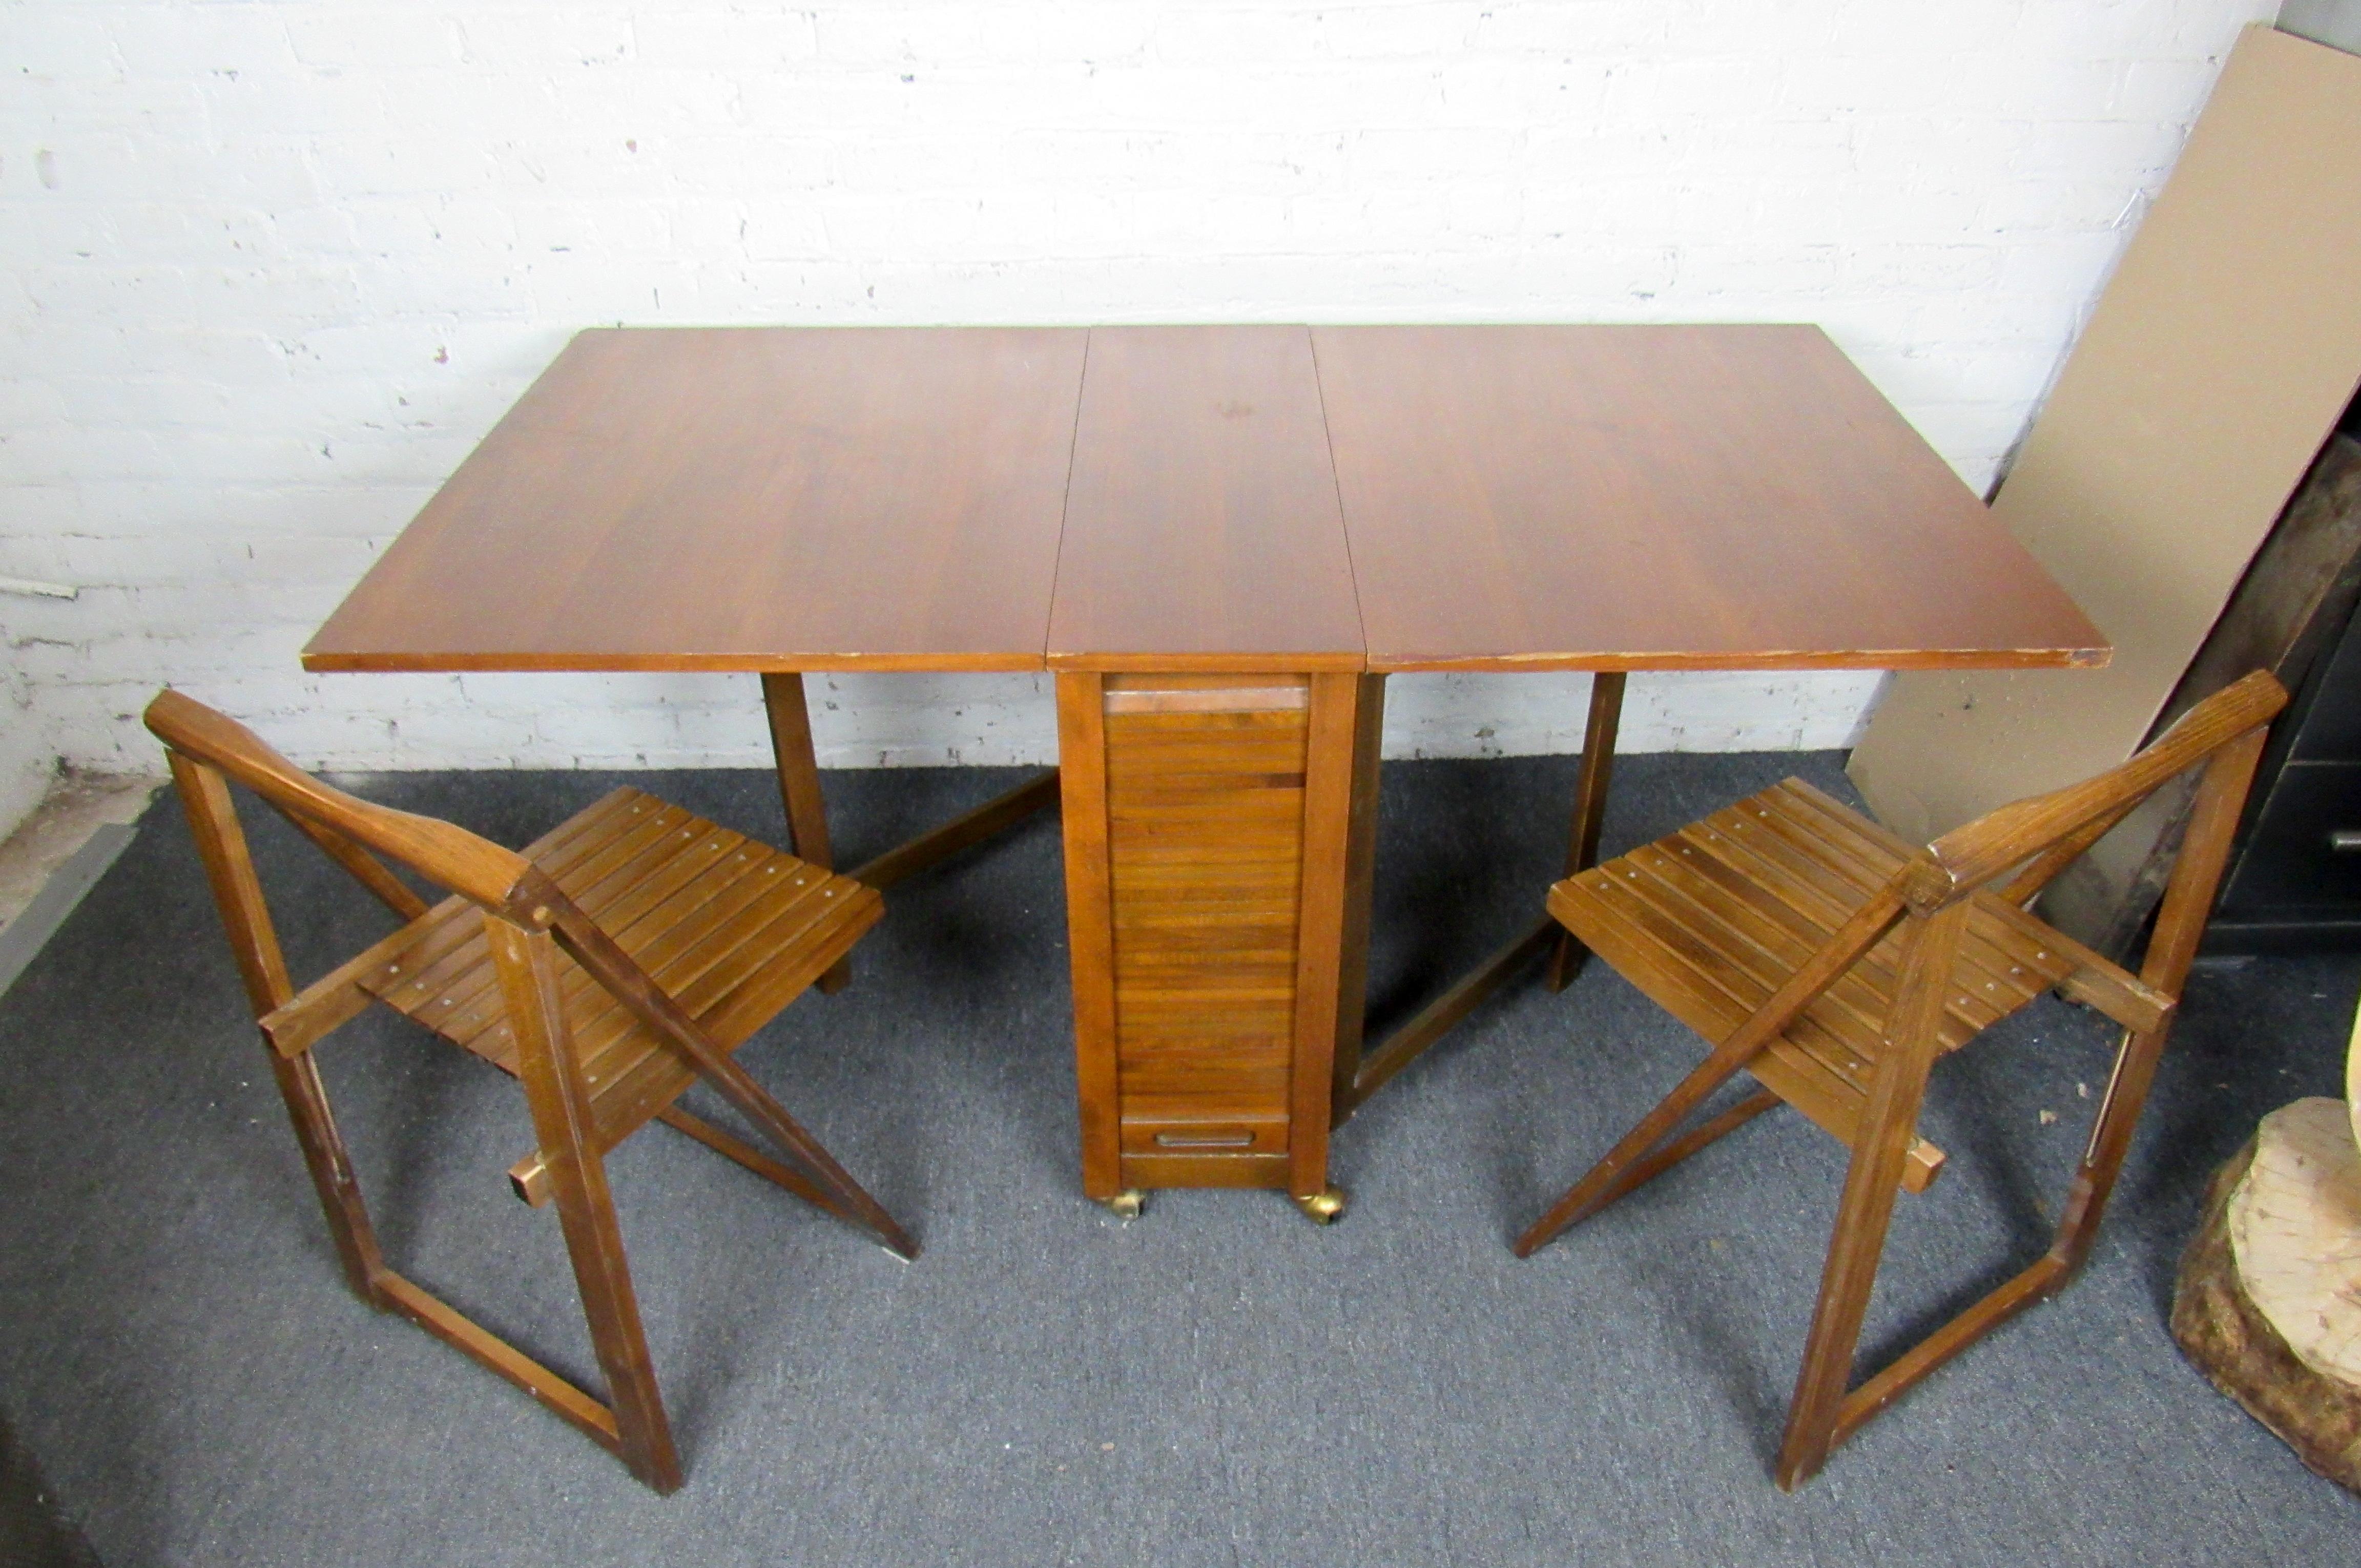 A timeless Mid-Century Modern design, this drop leaf table stores away in a compact design with storage for four folding chairs. Rich woodgrain is complemented by brass accents on the table's rolling base. Please confirm item location with seller